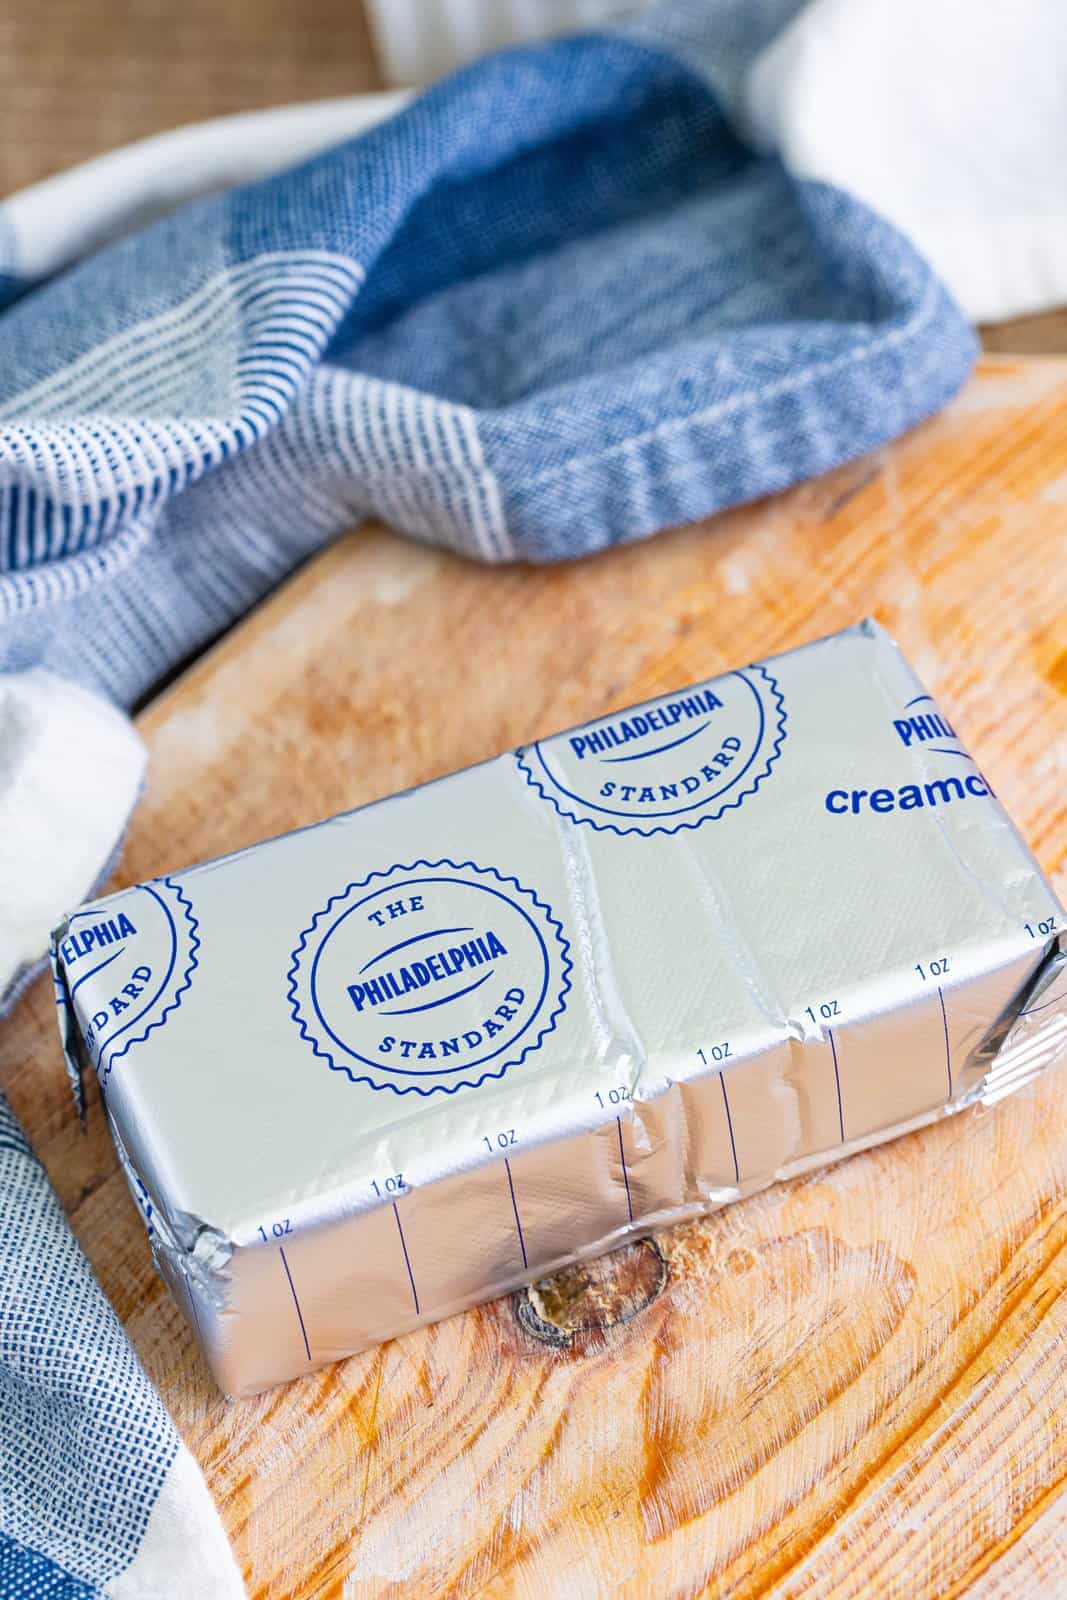 A wrapped up block of Philadelphia Cream Cheese sitting on the counter softening.